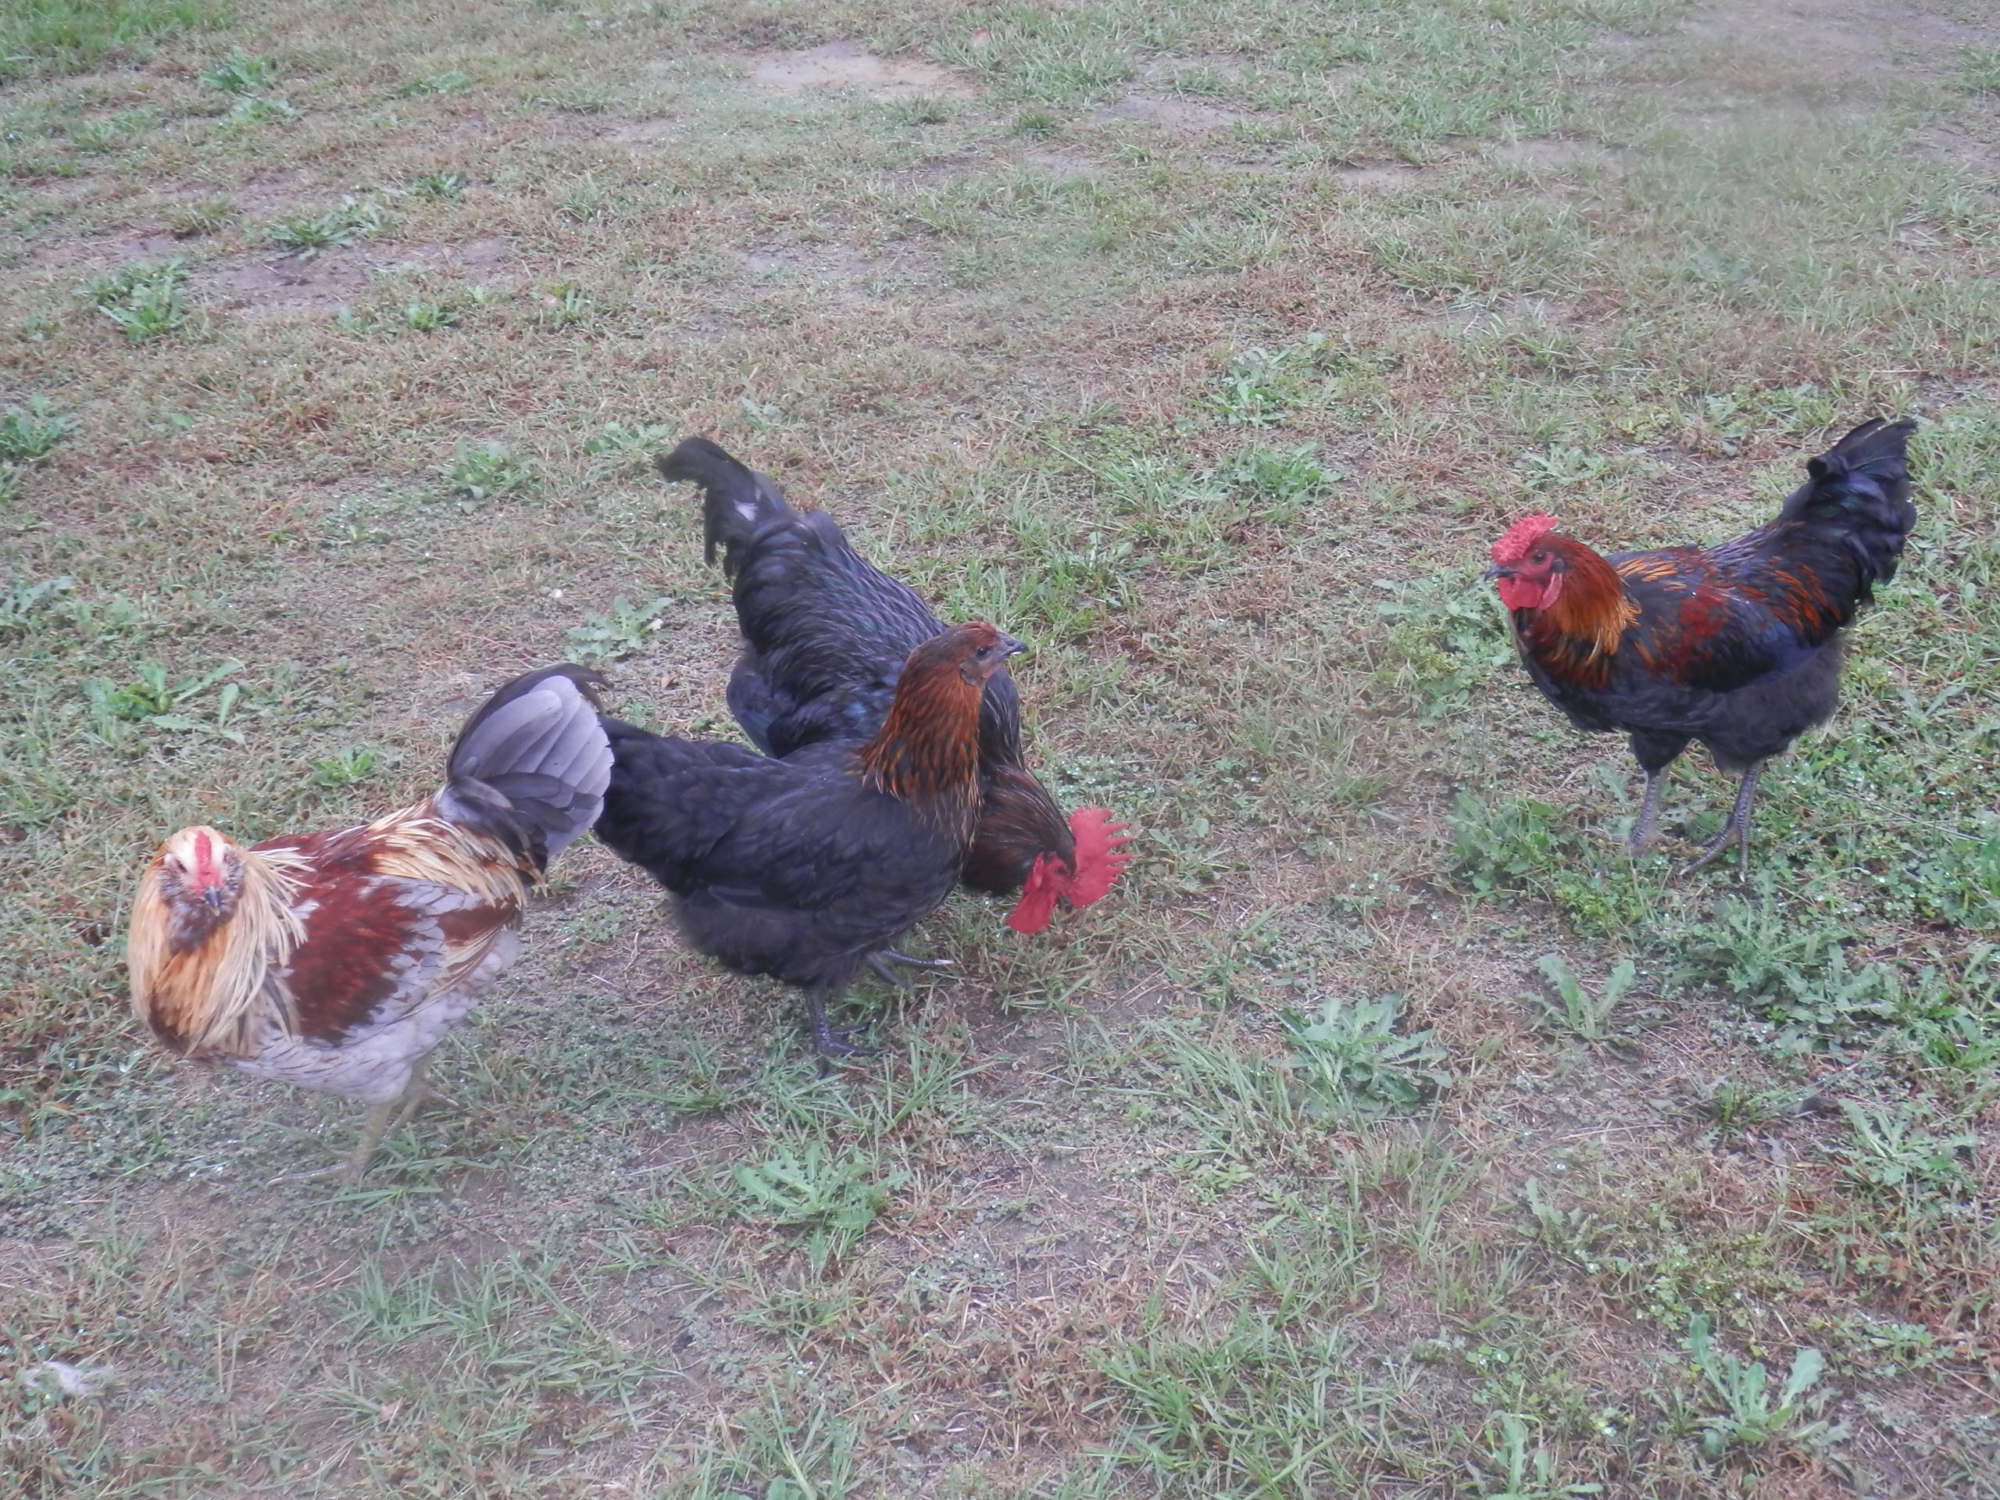 Our free range chickens.